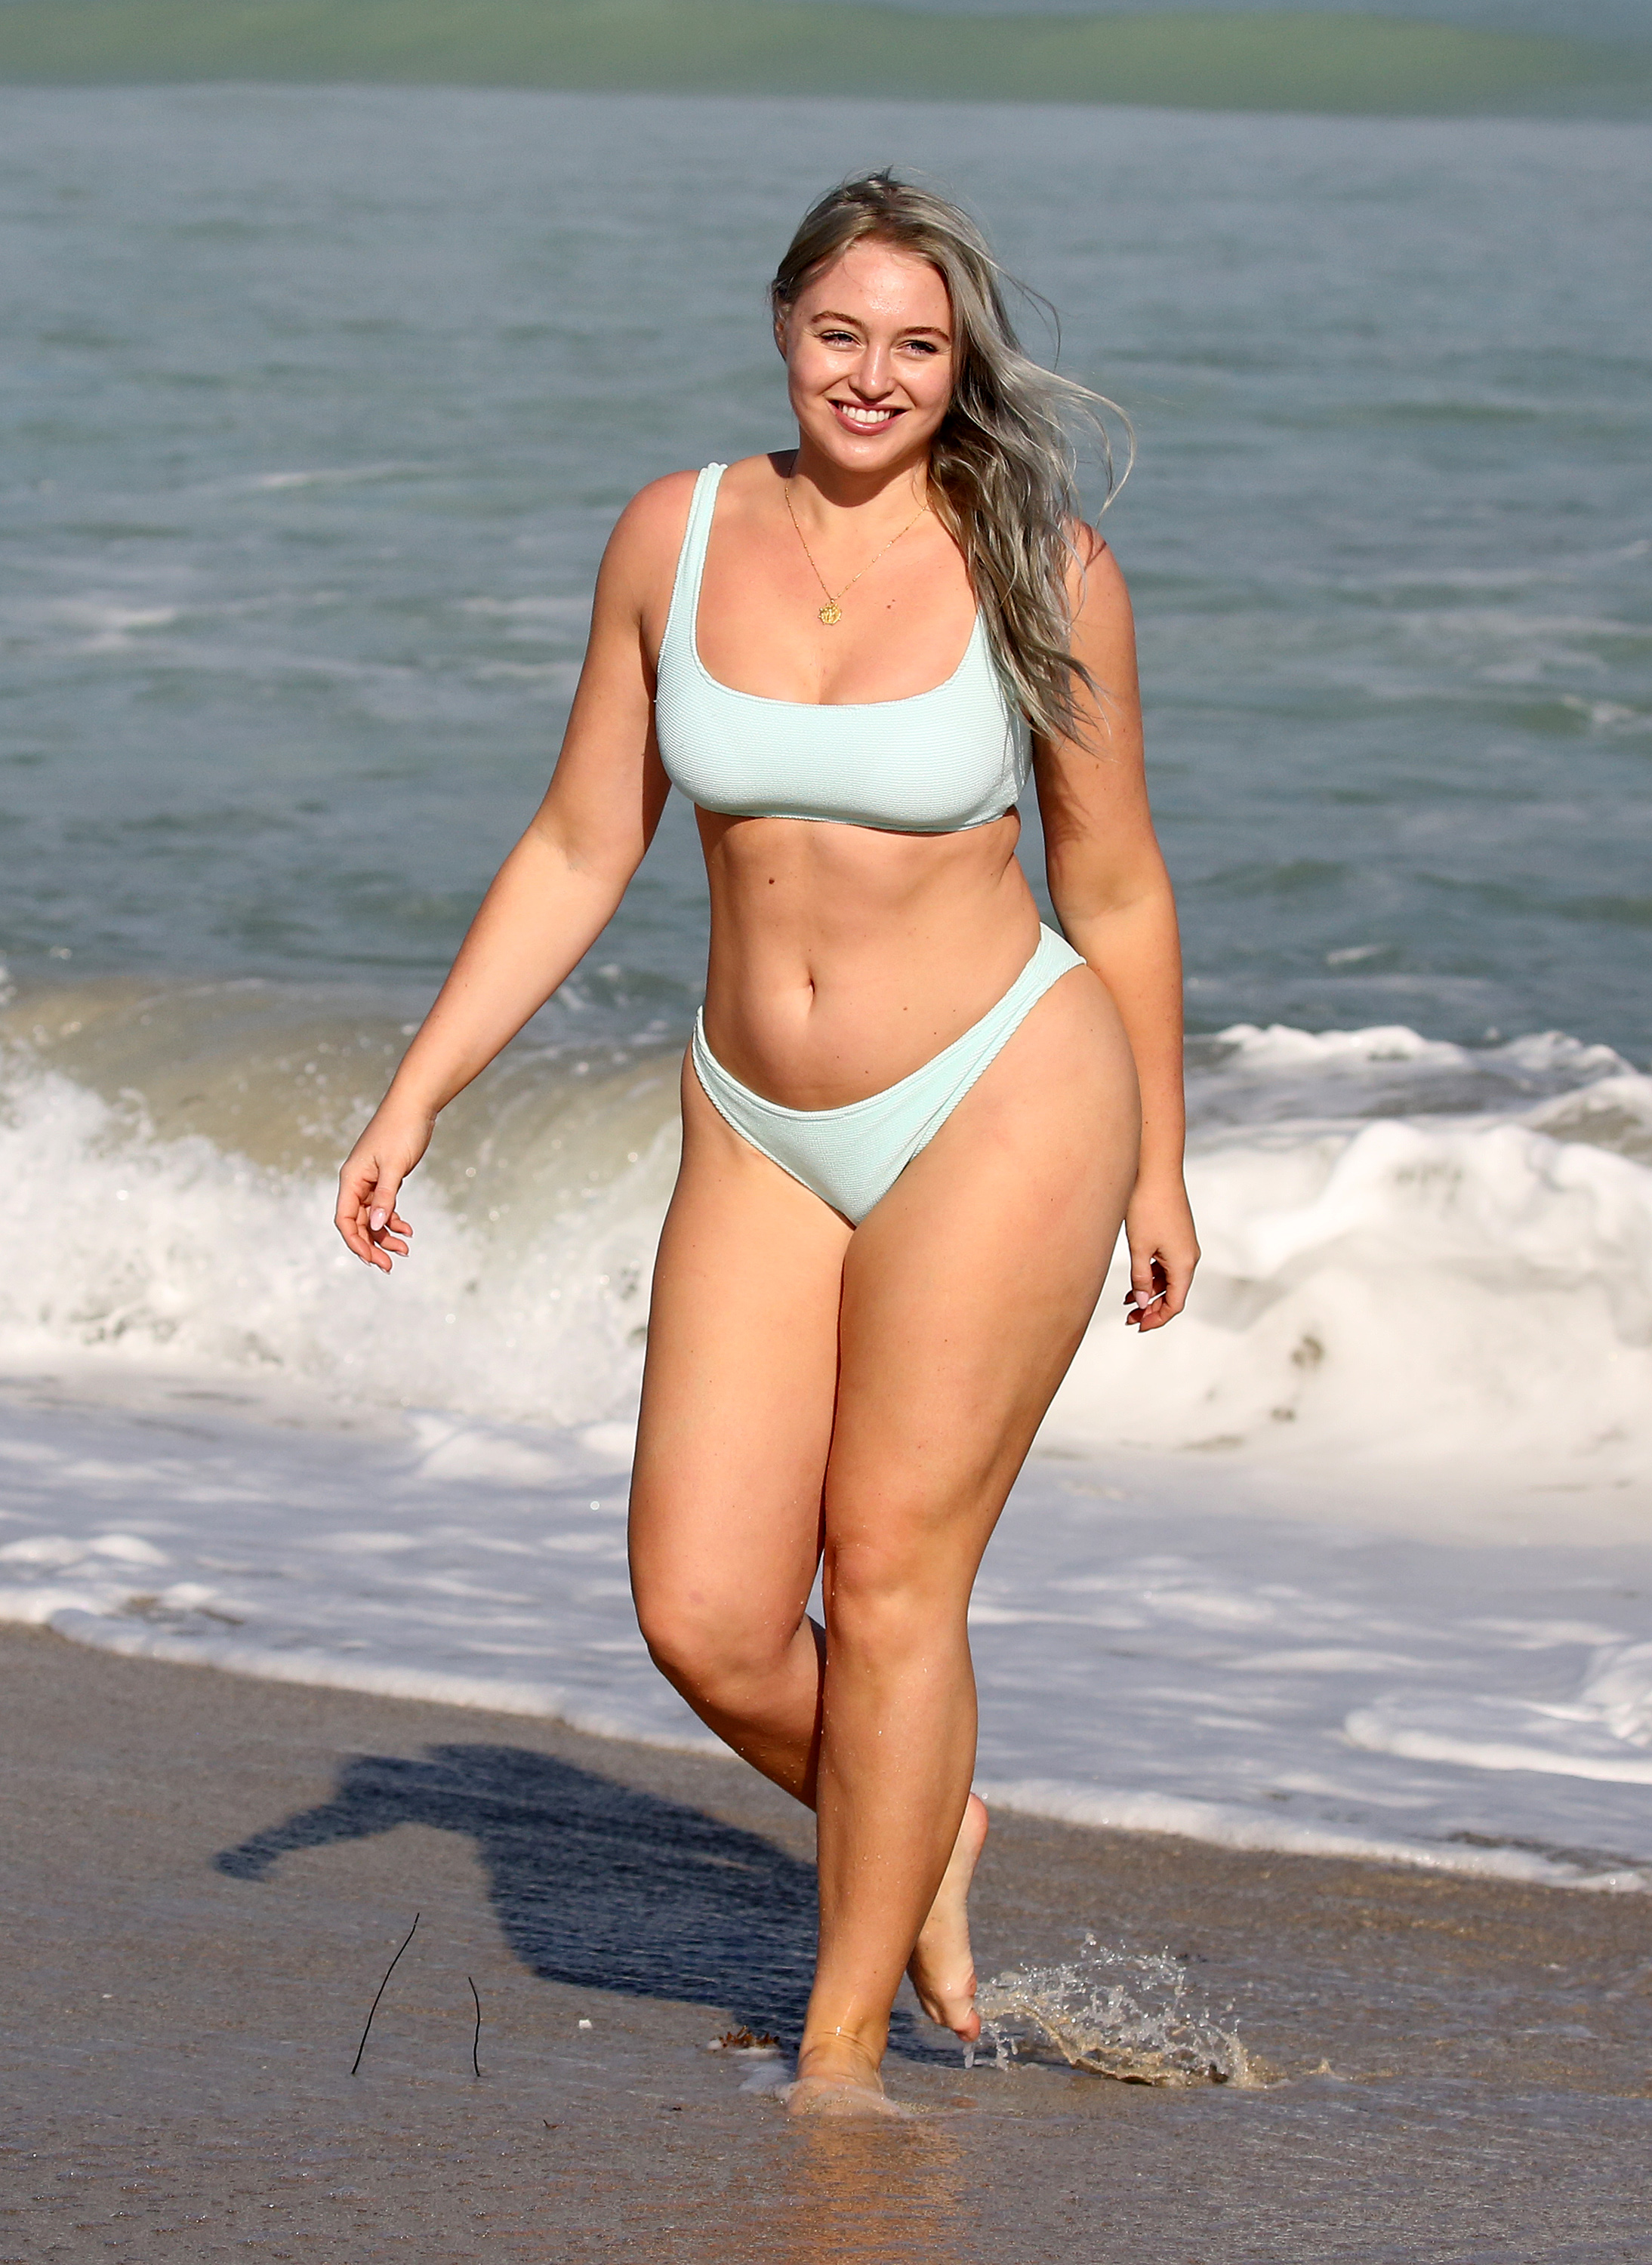 Iskra Lawrence Bikini Pictures That